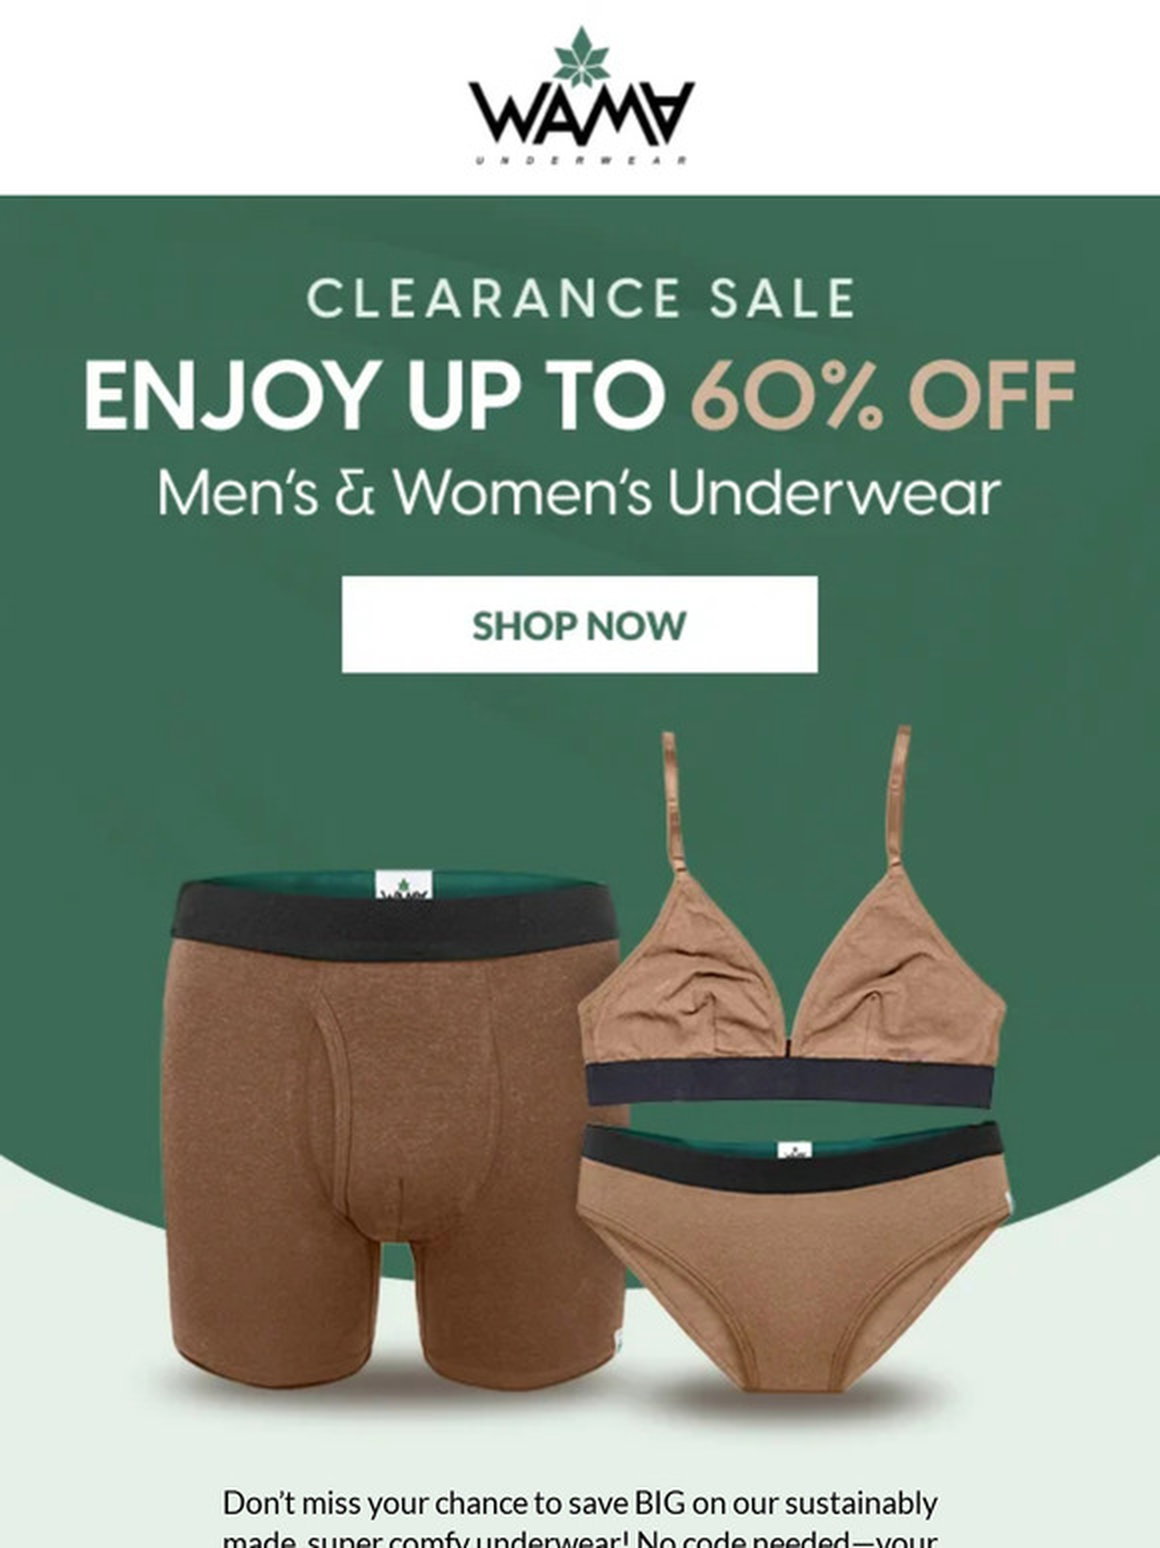 WAMA Underwear: 9 Breast Shapes And How To Support Them